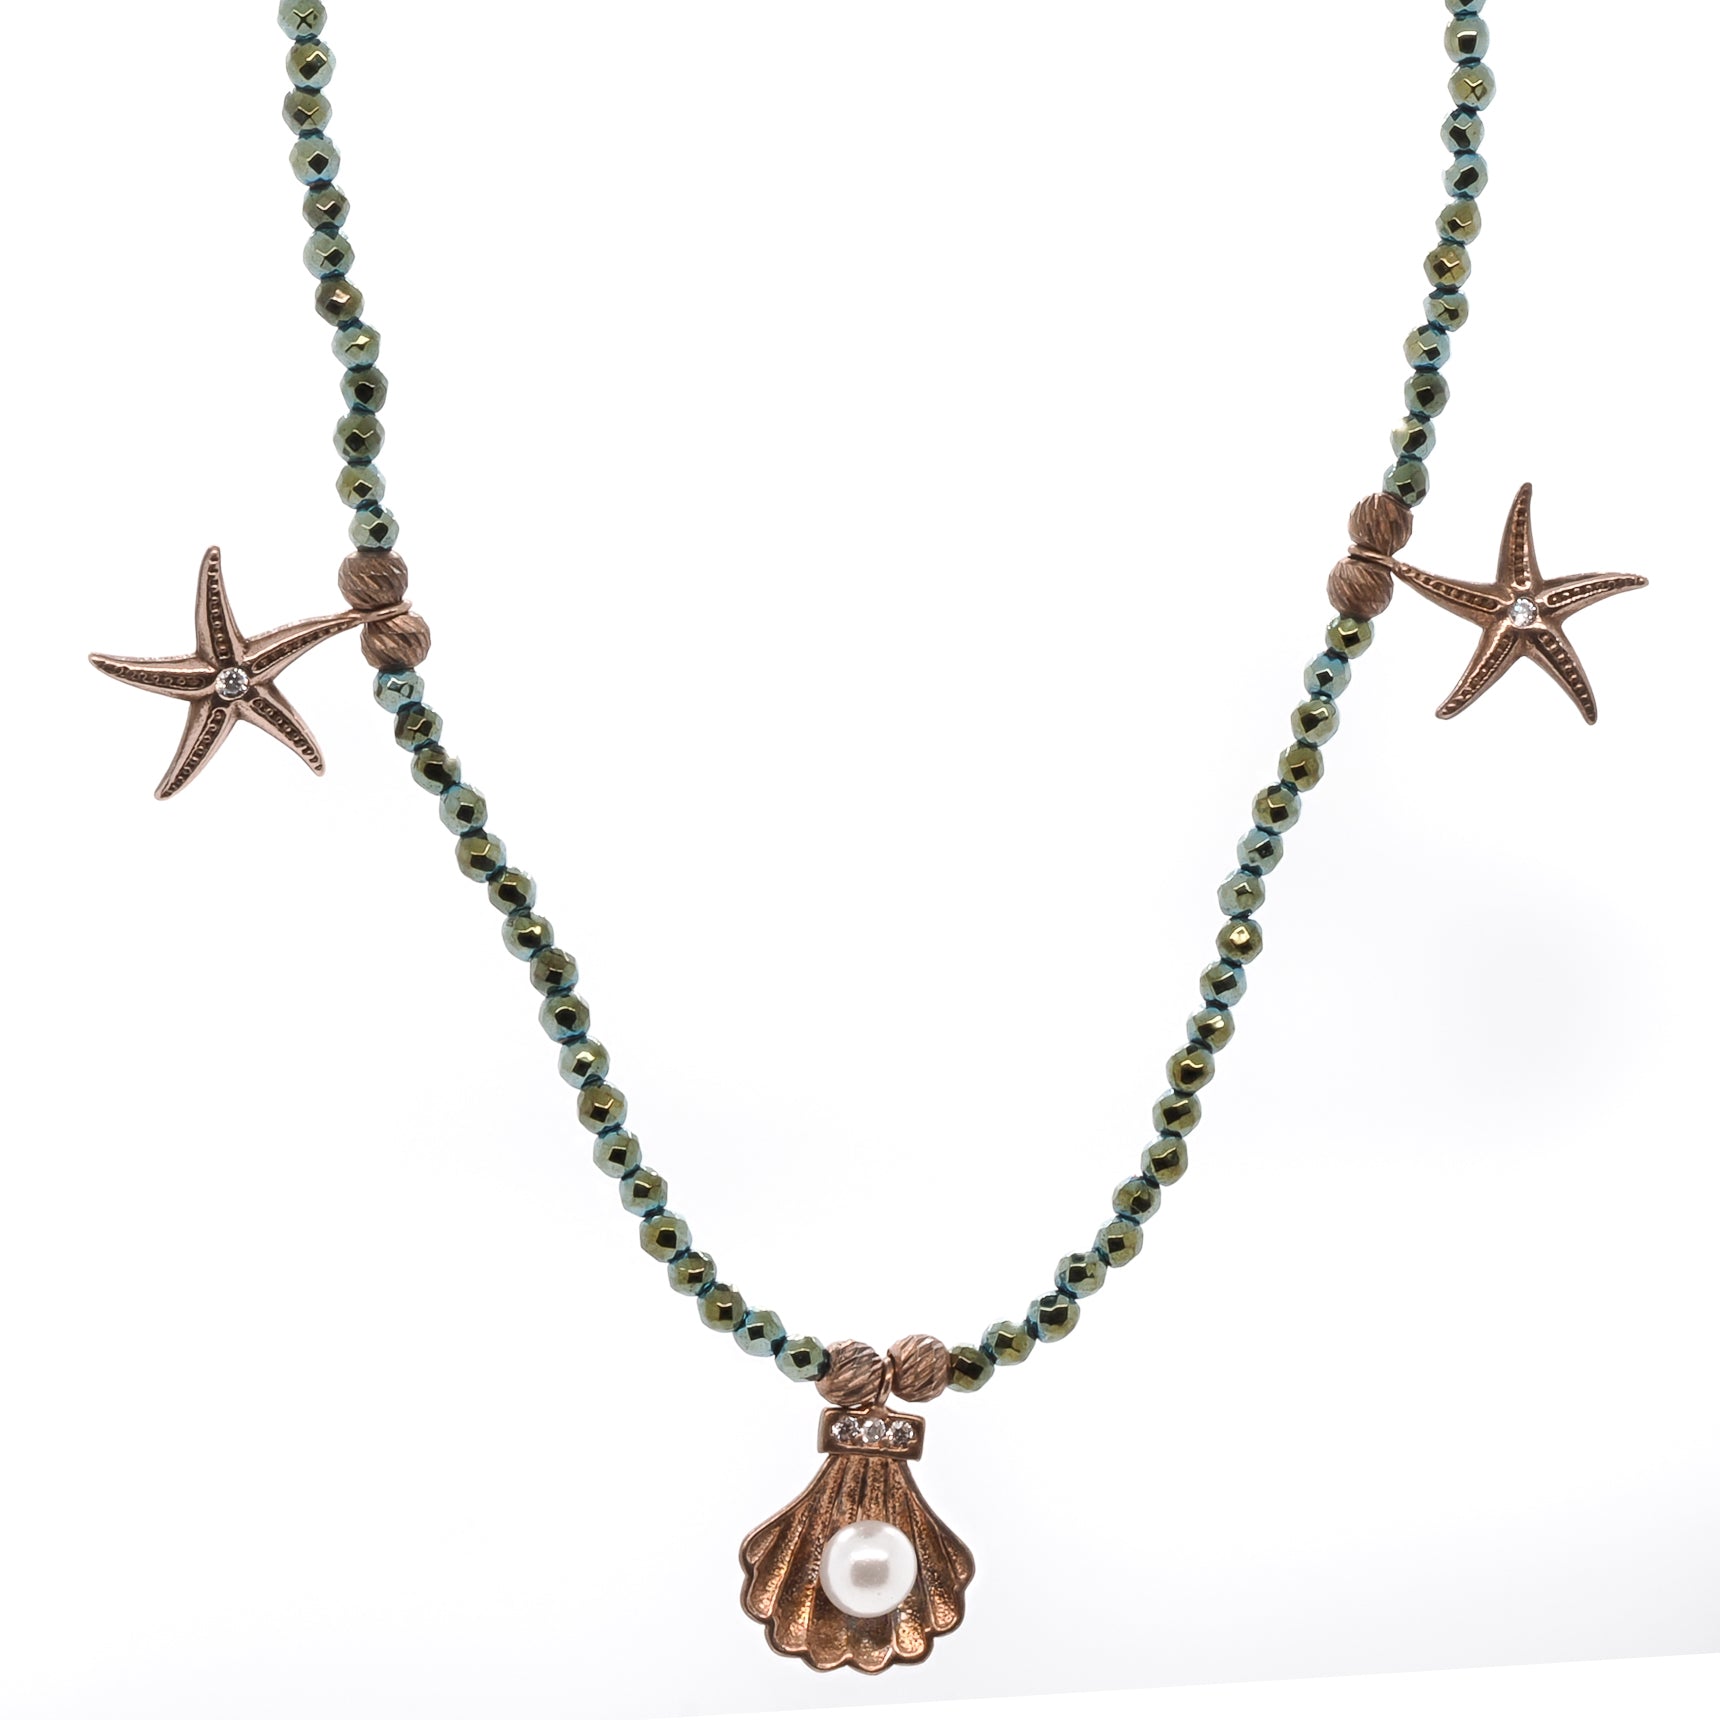 The perfect gift for beach lovers: the Beach Day Necklace